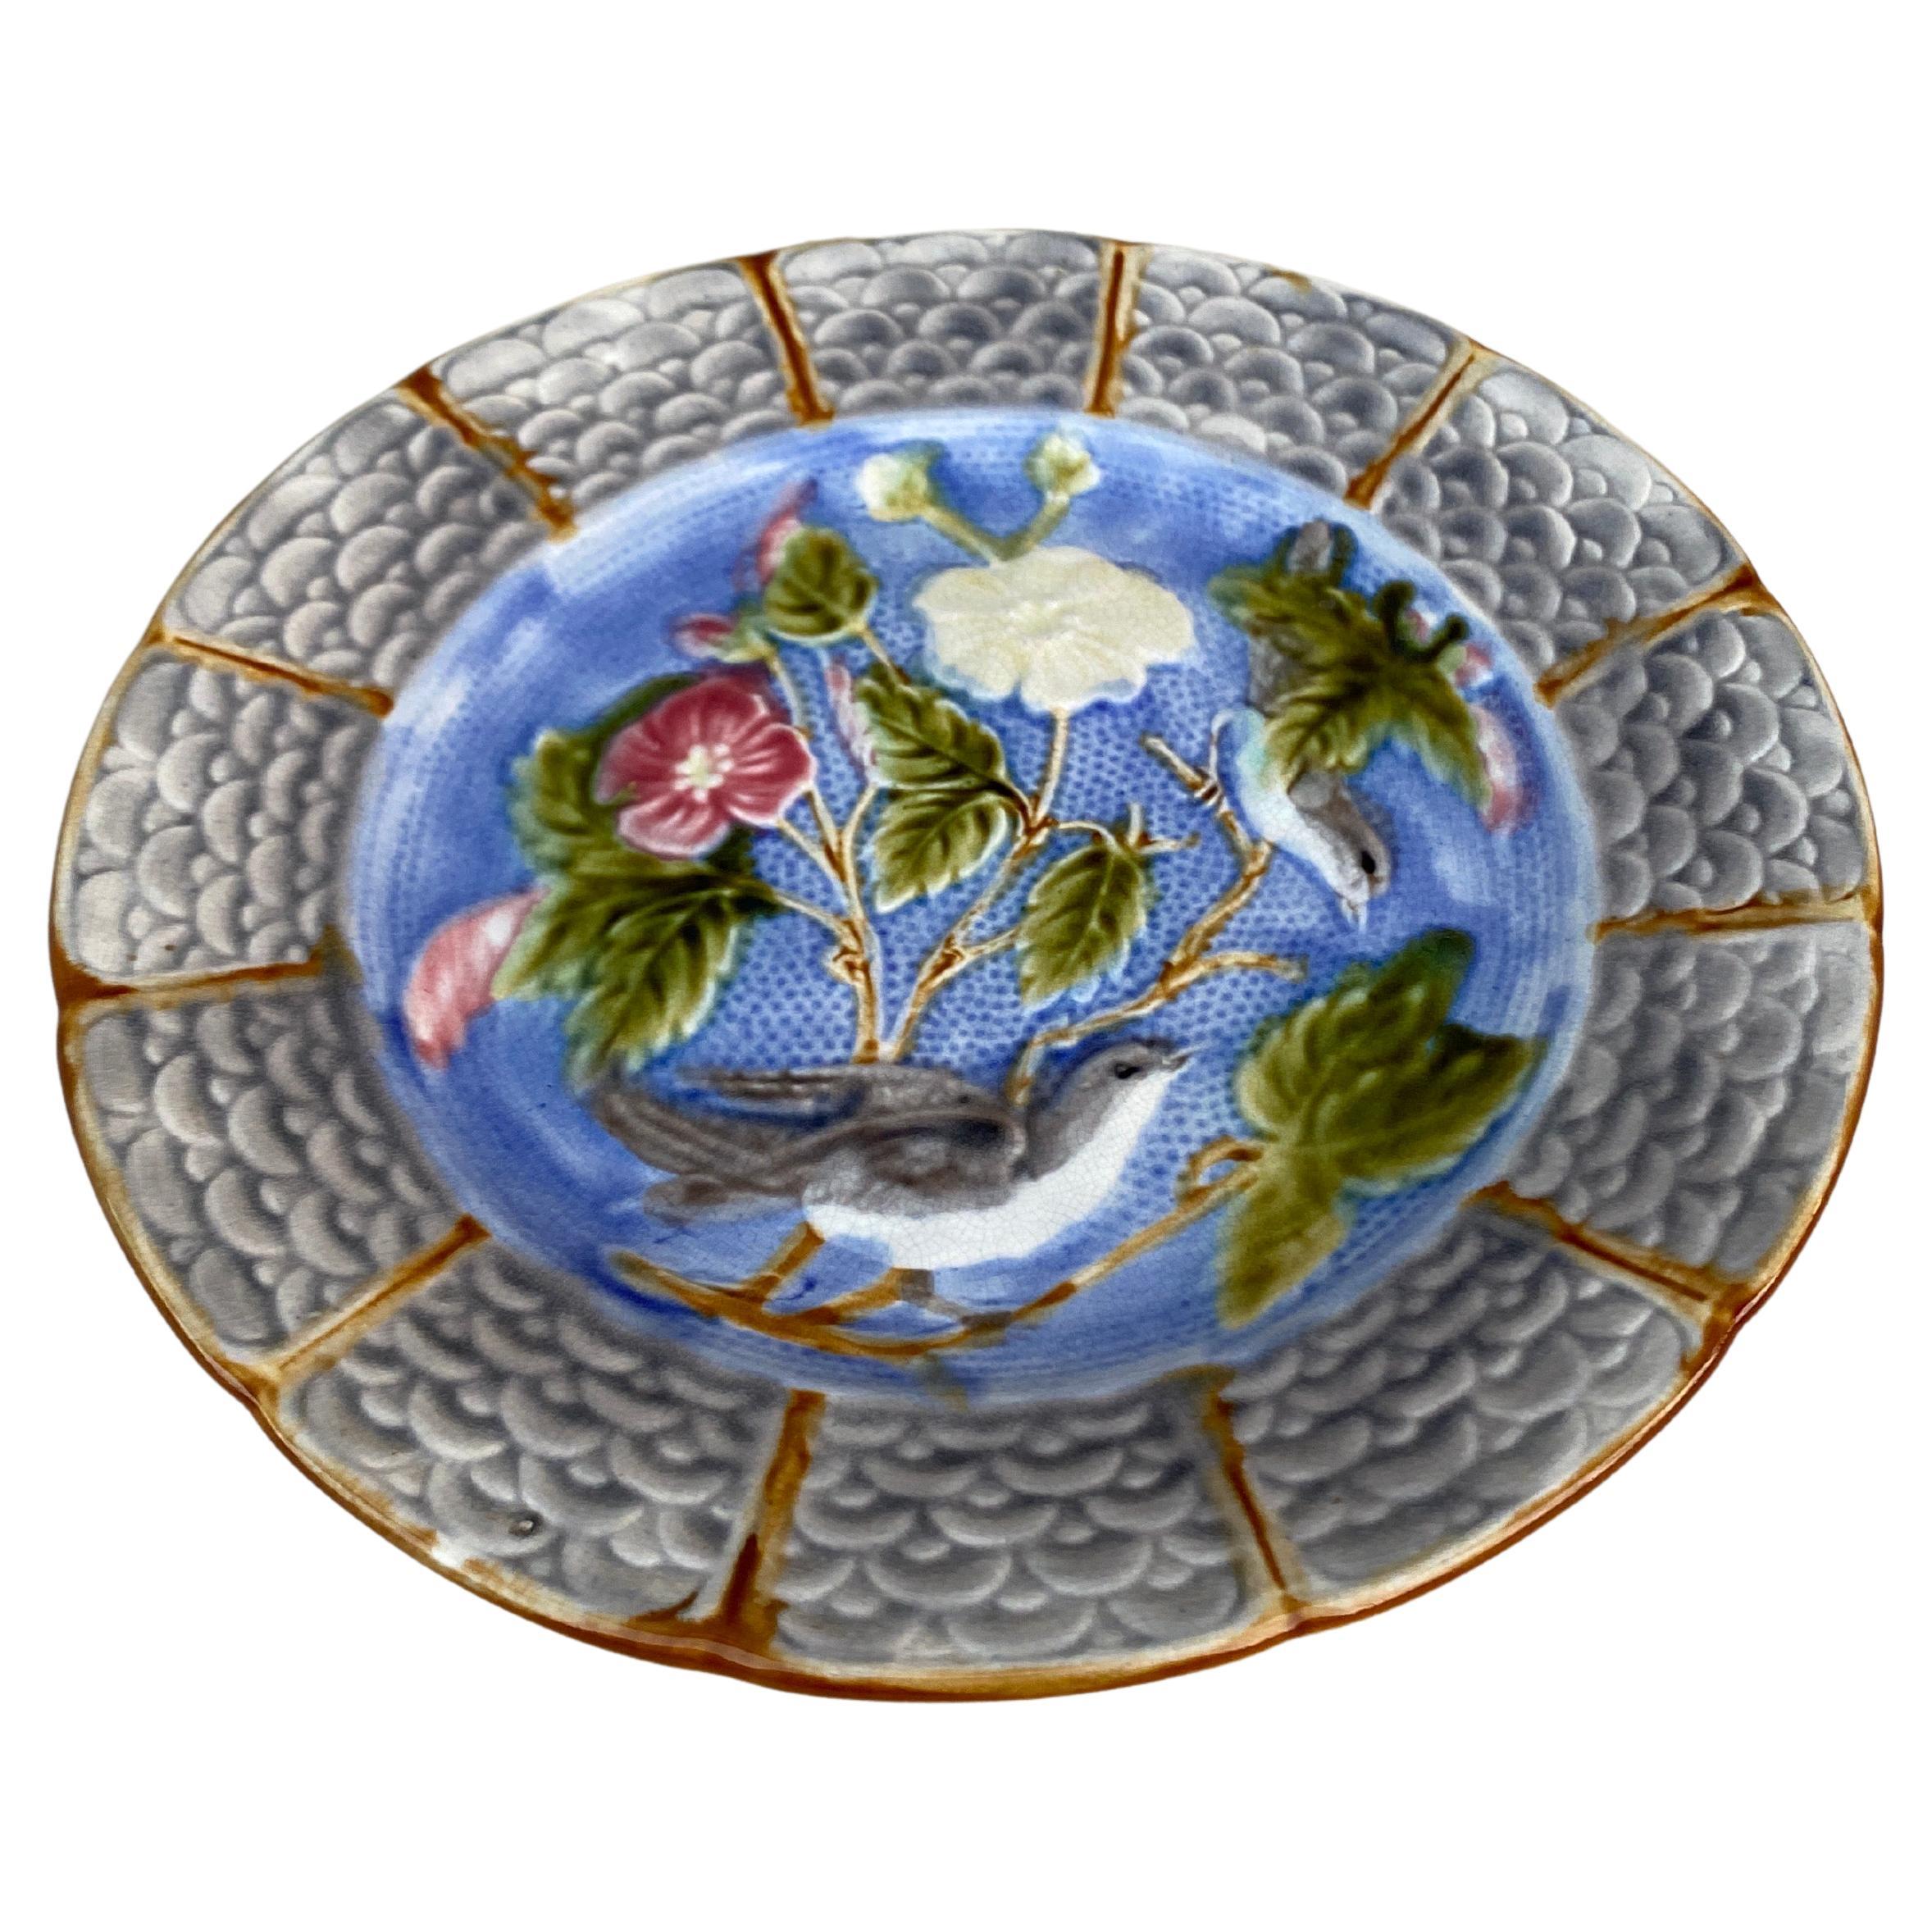 French Majolica Bird Plate signed Nimy Les Mons, circa 1890.